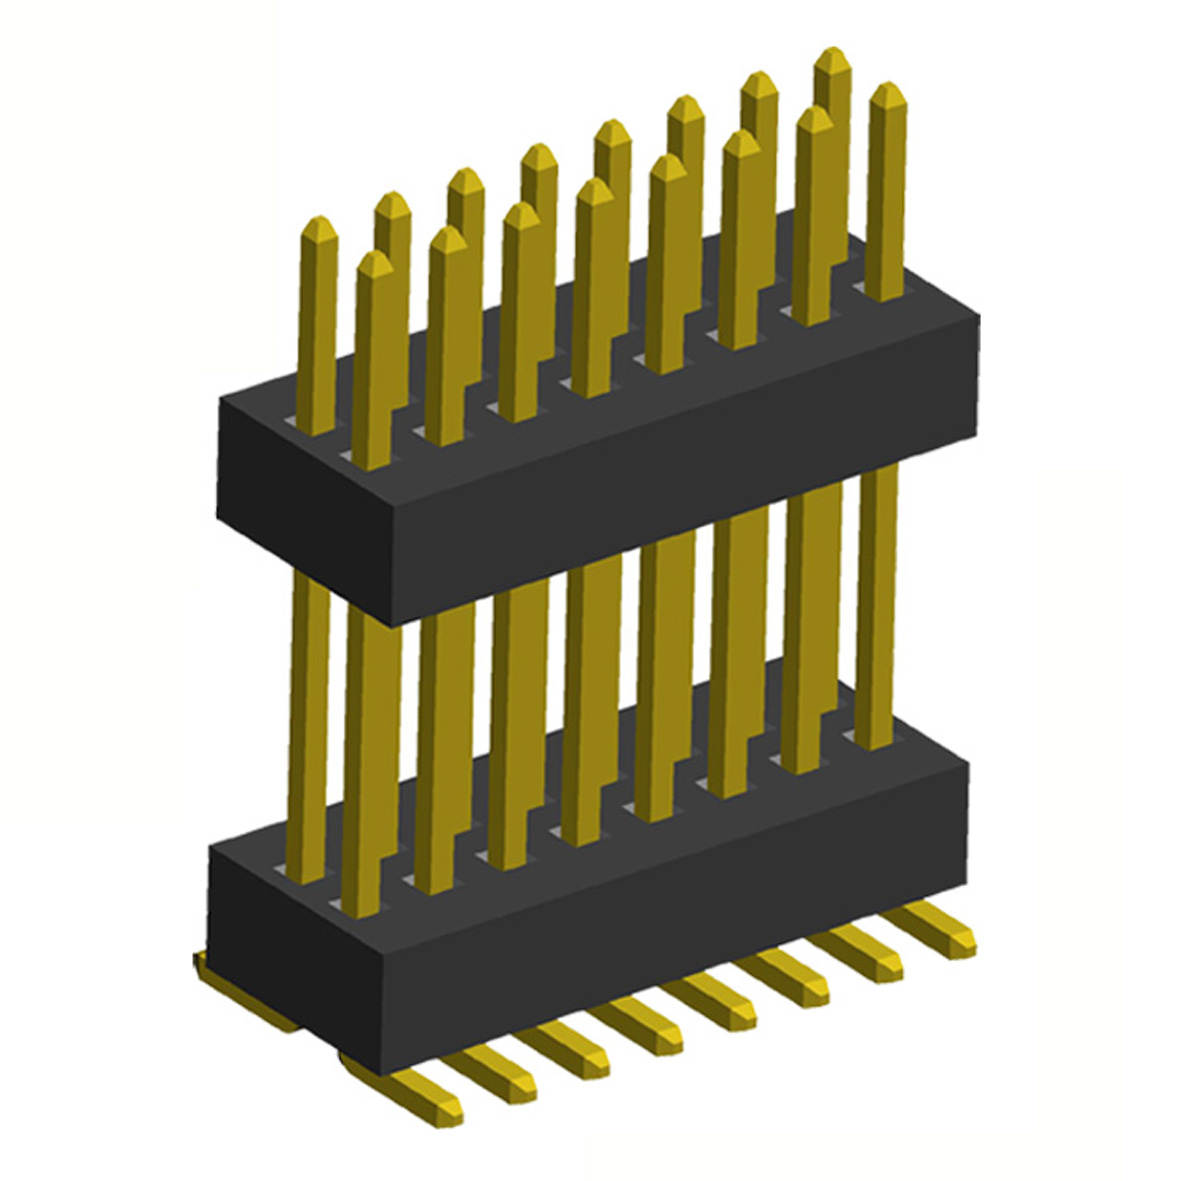 2191SMDI-XXXG series, open double row elevated straight pin headers on PCB for surface mounting (SMD), pitch 1.00 mm, Board-to-Board connectors, pin headers and sockets for them > pitch 1.00 mm